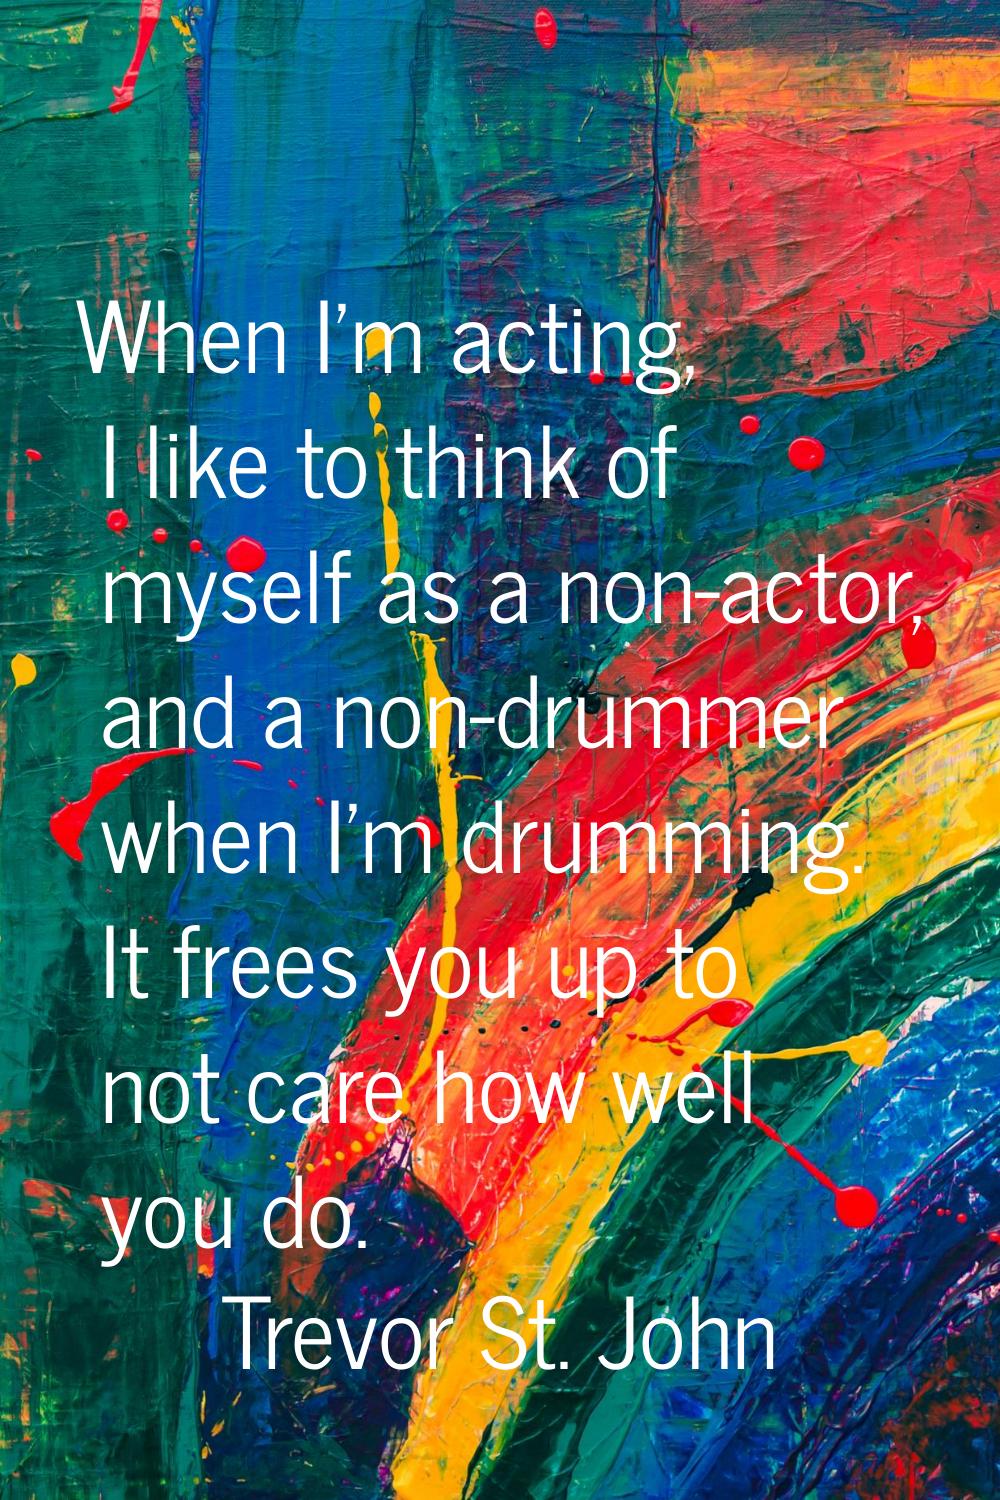 When I'm acting, I like to think of myself as a non-actor, and a non-drummer when I'm drumming. It 